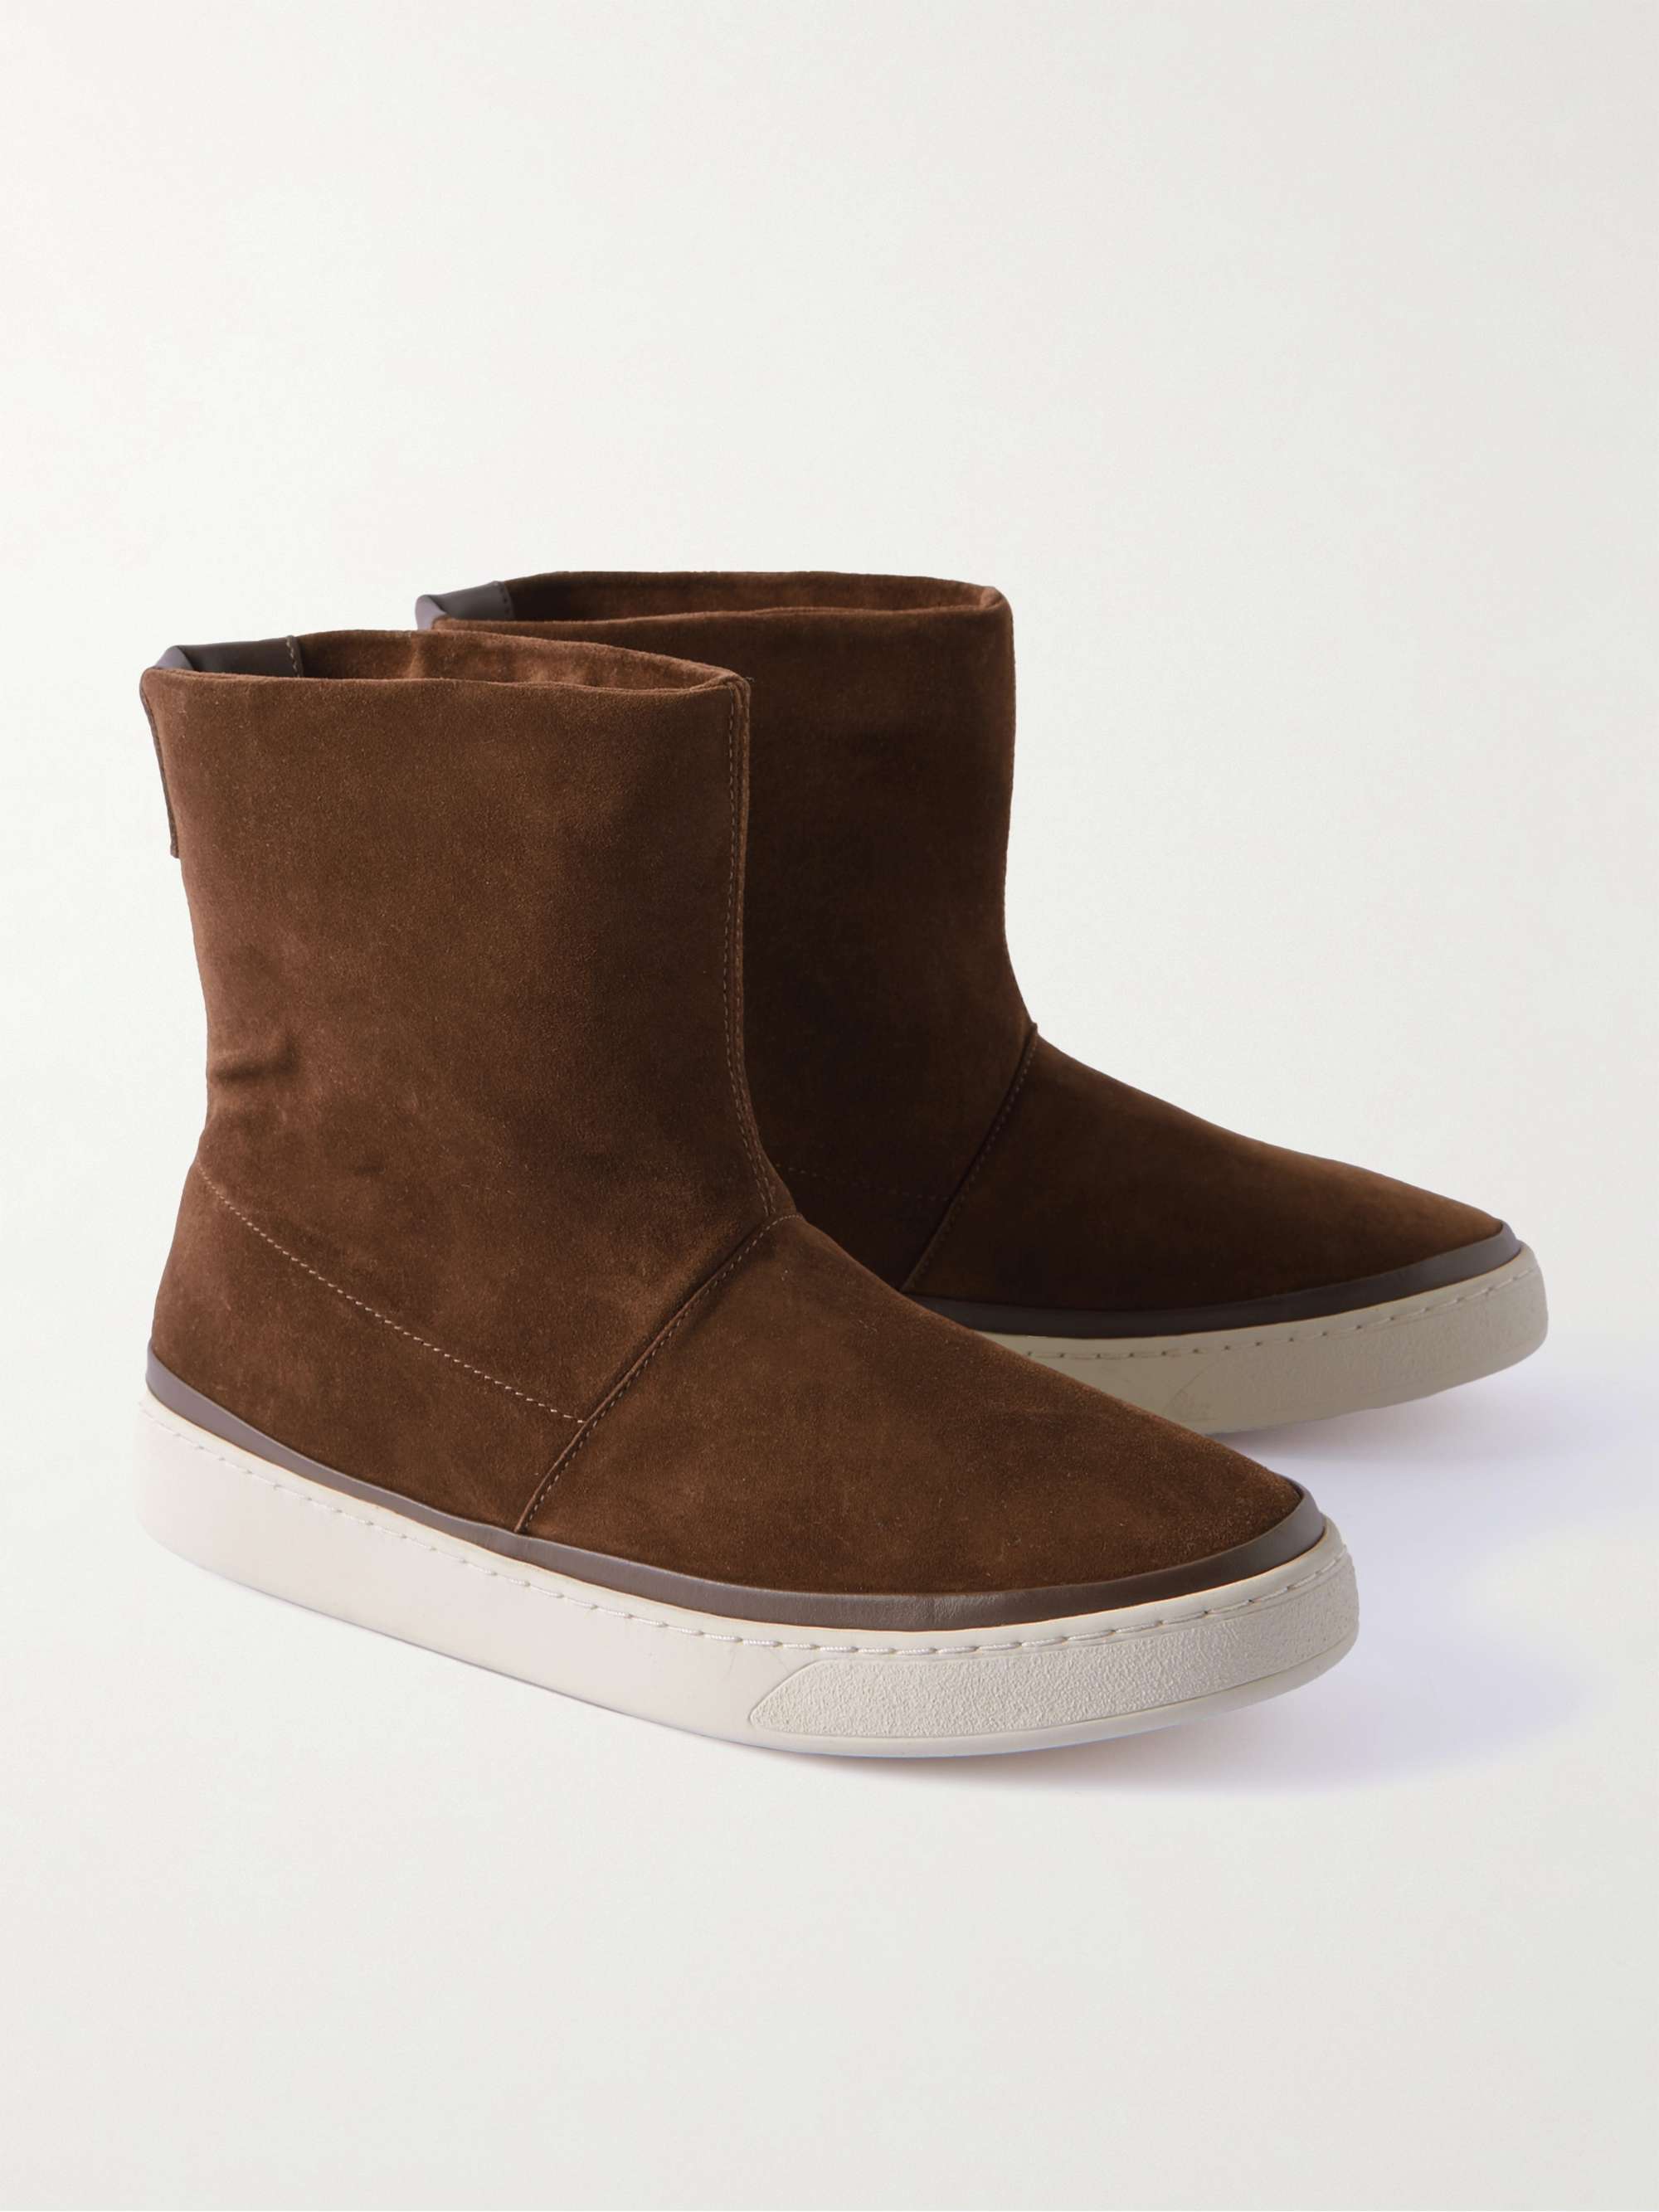 MULO Waxed Shearling-Lined Suede Slipper